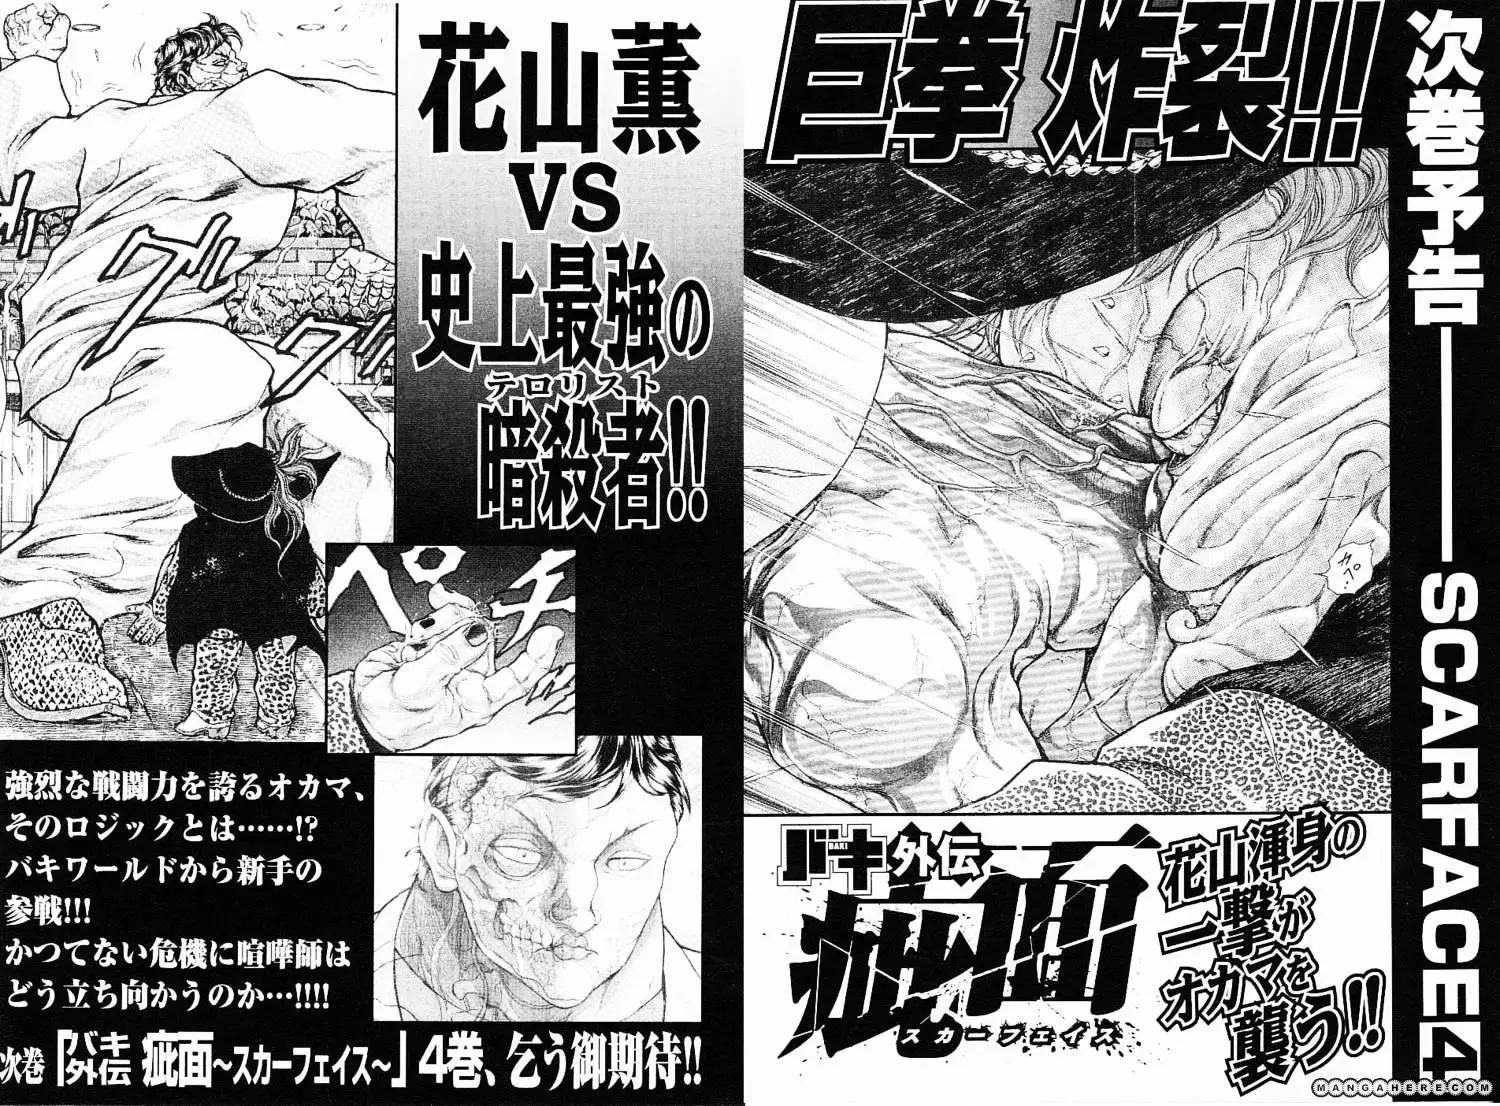 Baki Gaiden - Scarface - 20 page 25-7ad6b9be